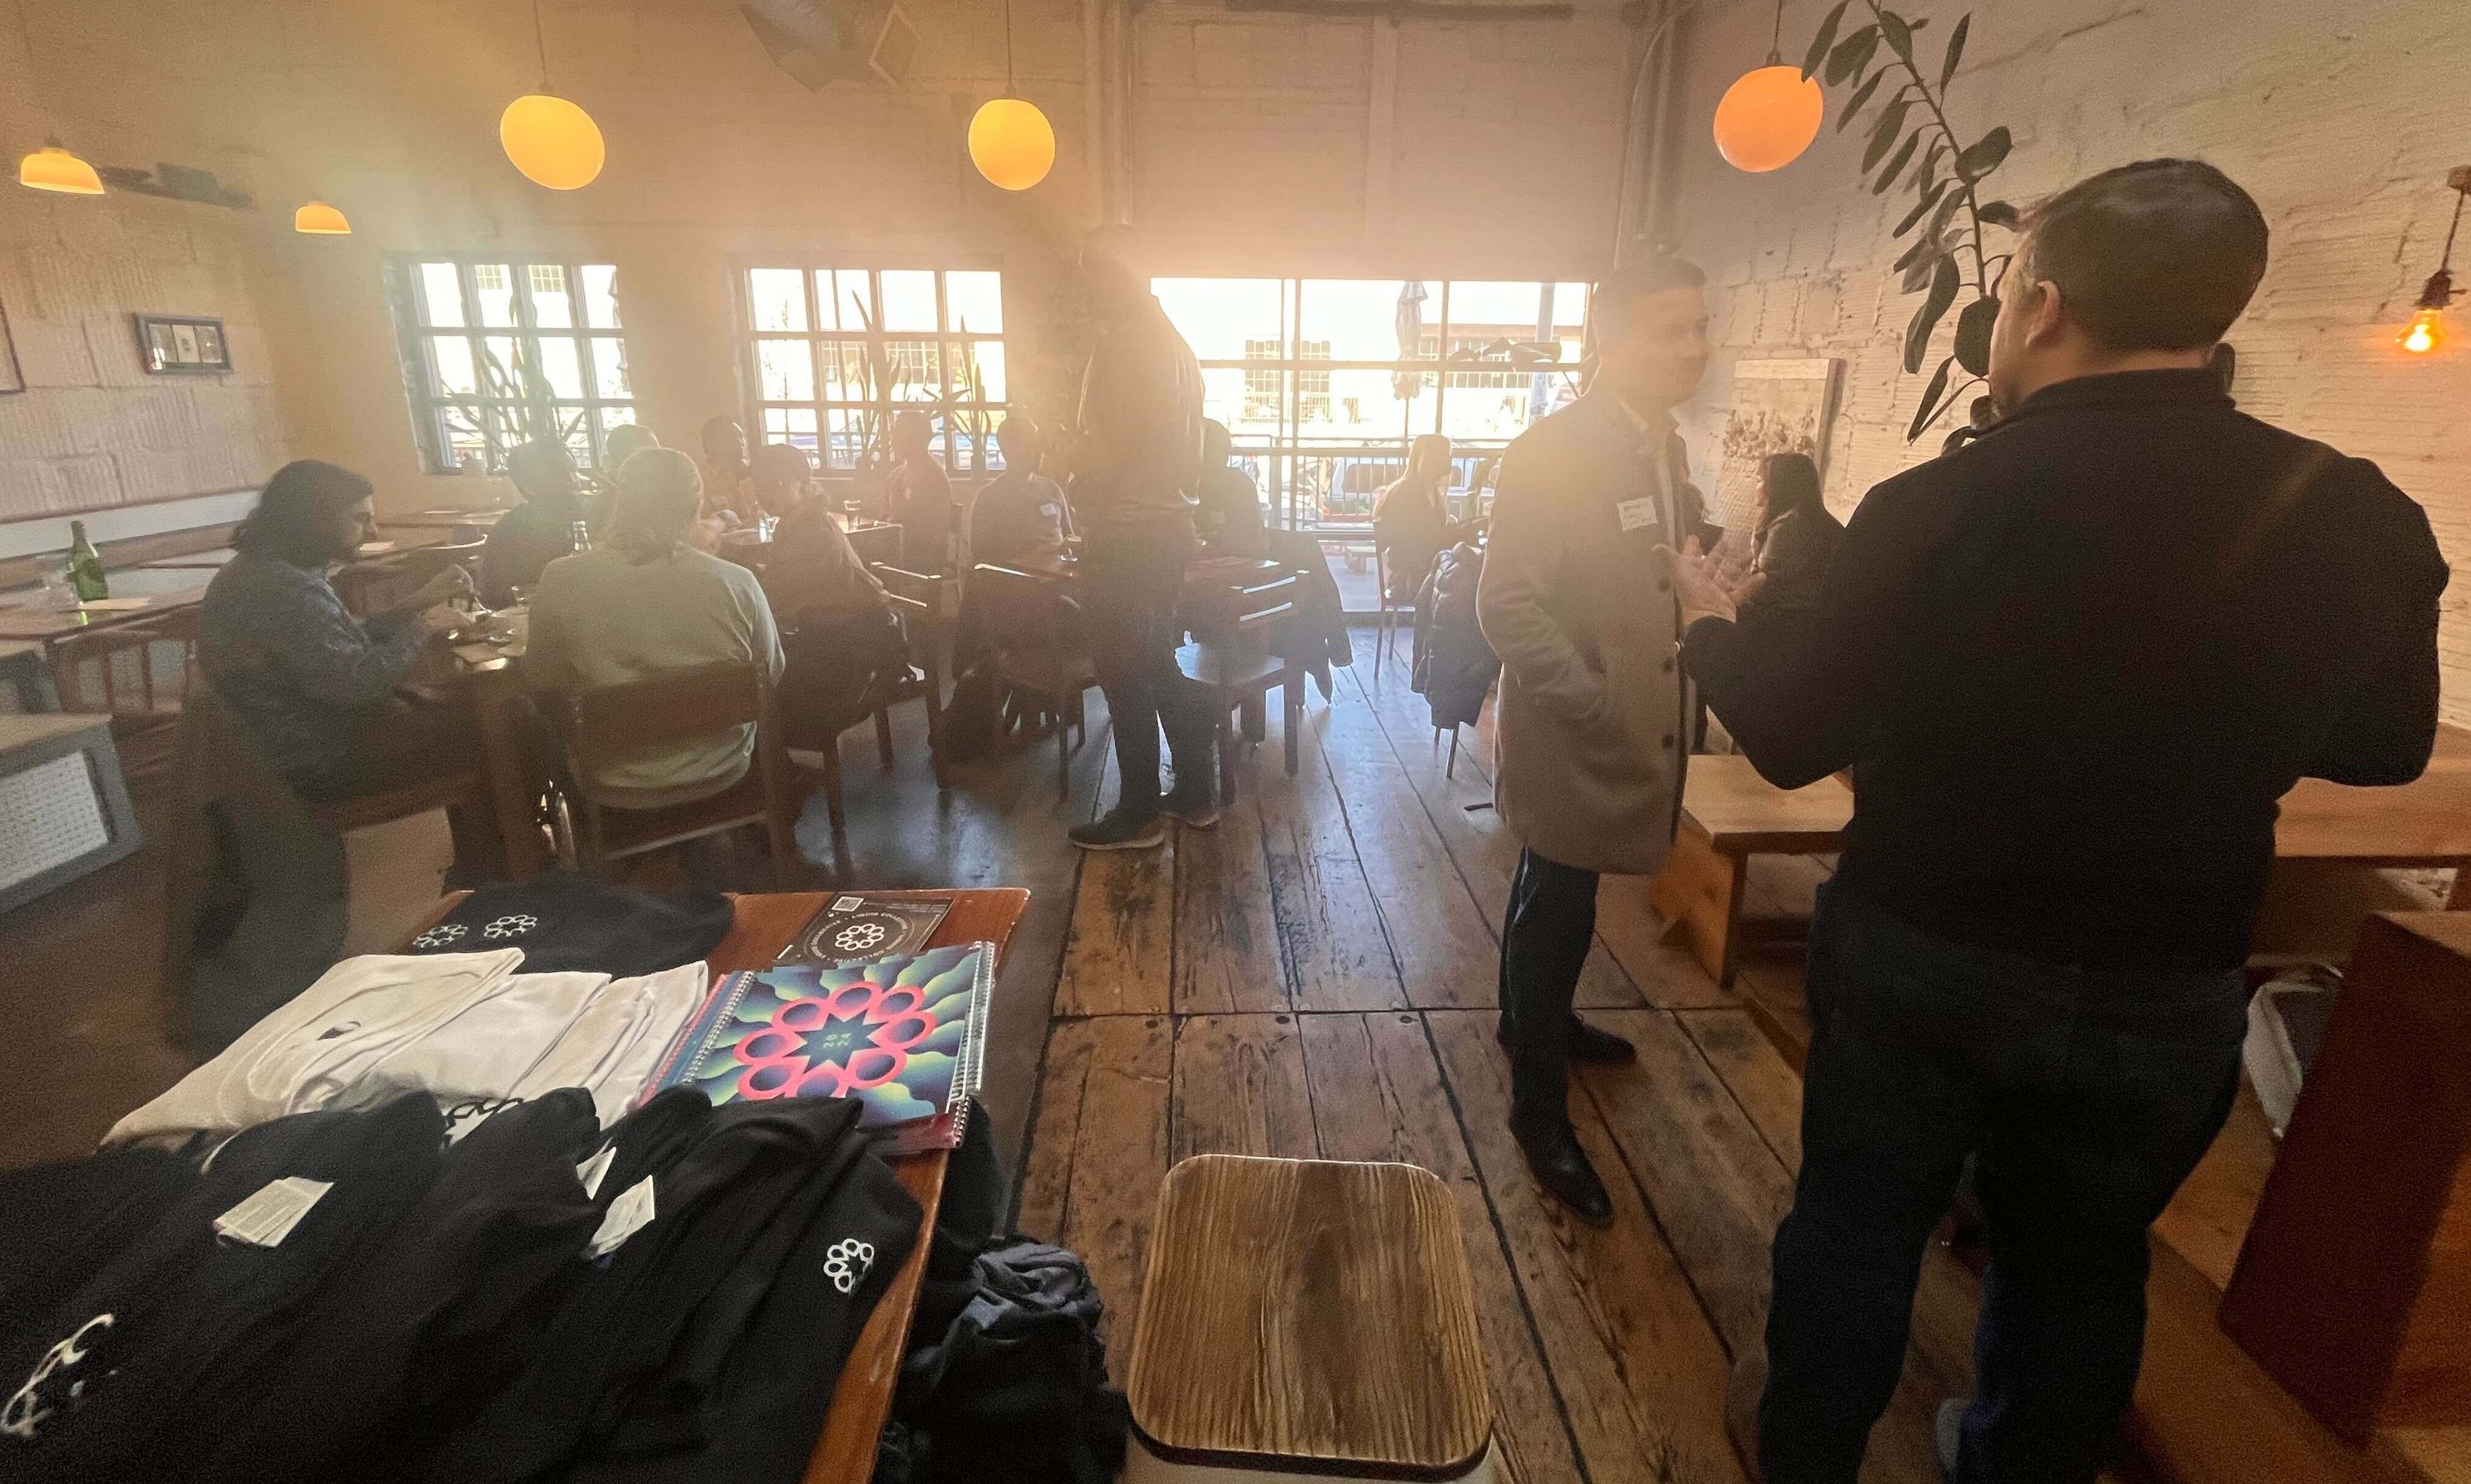 Thanks to all who attended the ETHDenver Security Breakfast cohosted by Liquid Collective, Certora, and Gauntlet